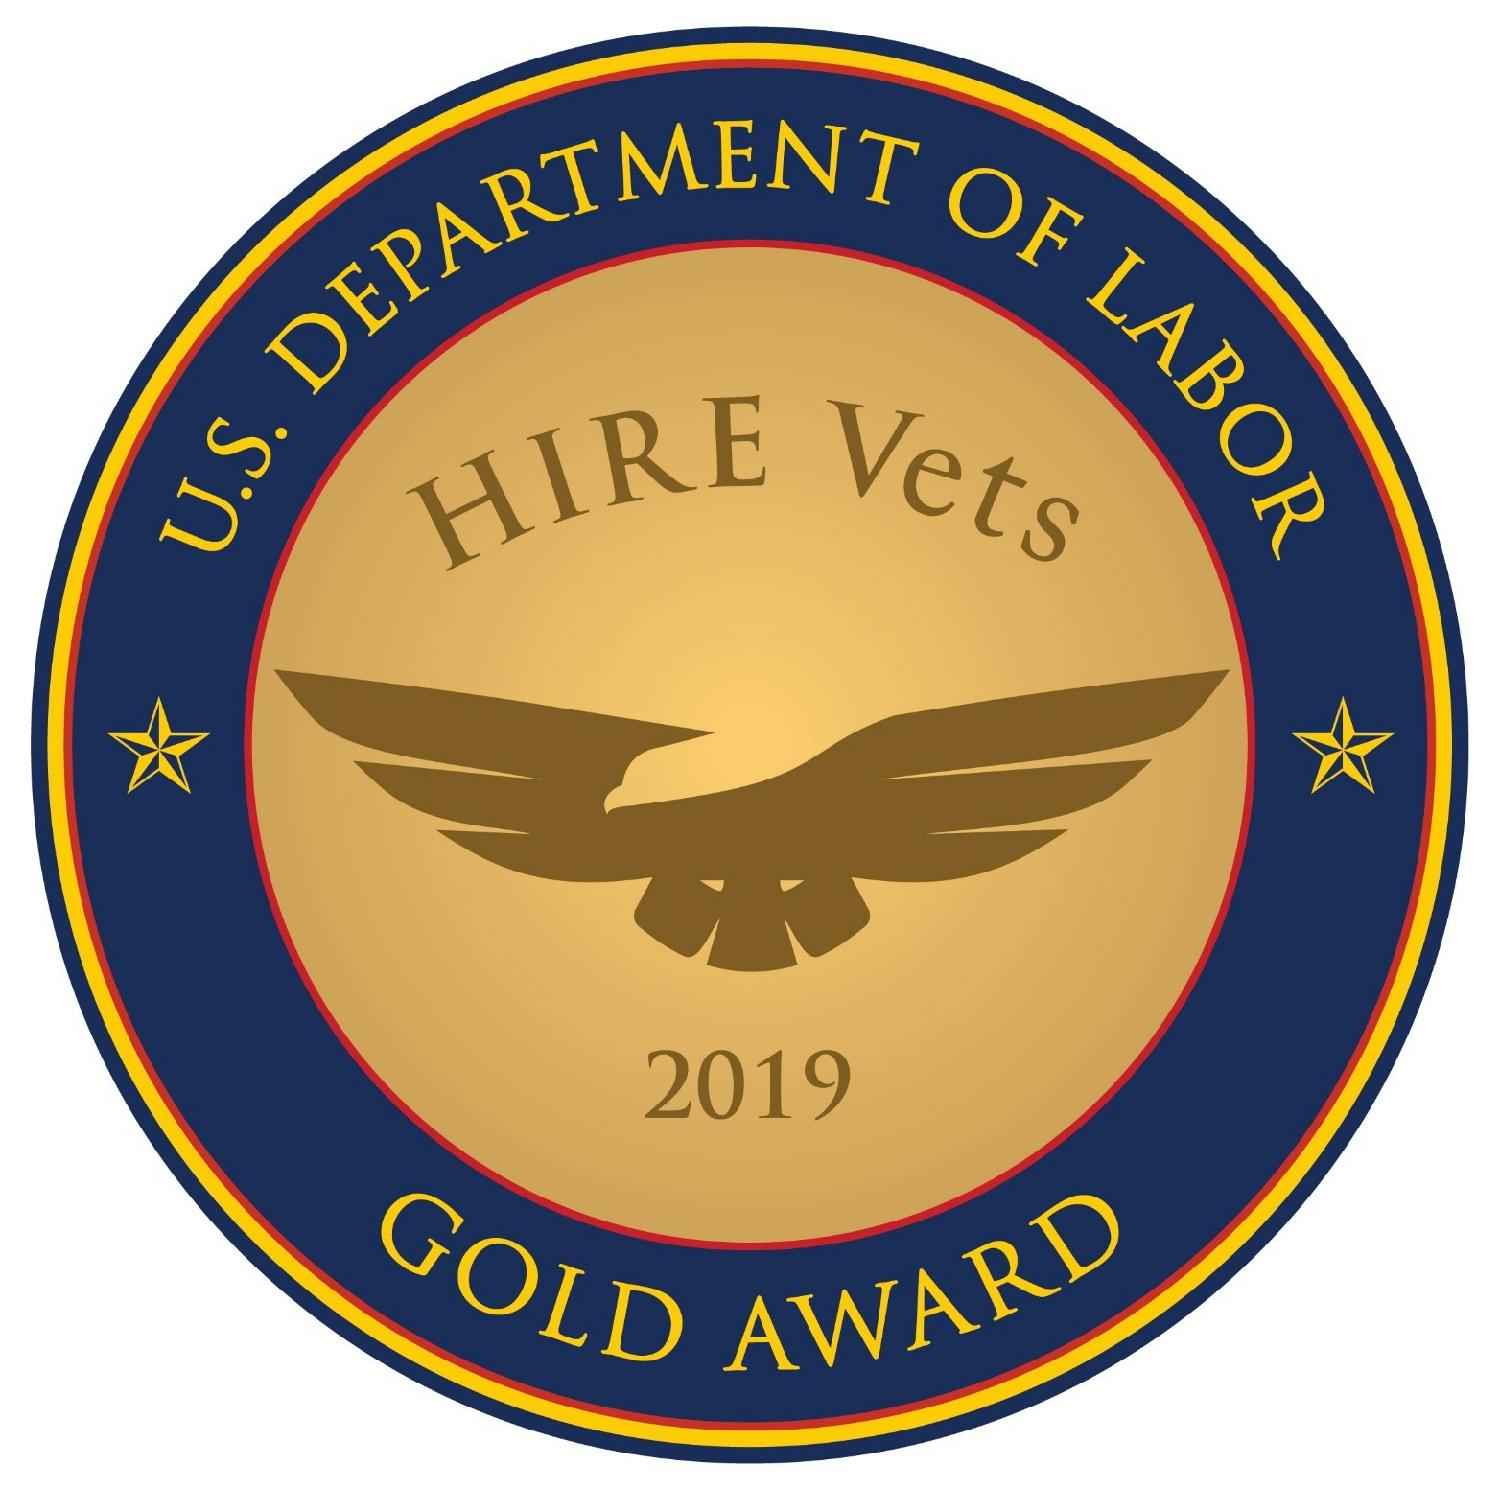 Kitty Hawk has qualified for the Hire Vets Gold Award for 2019 and 2020.